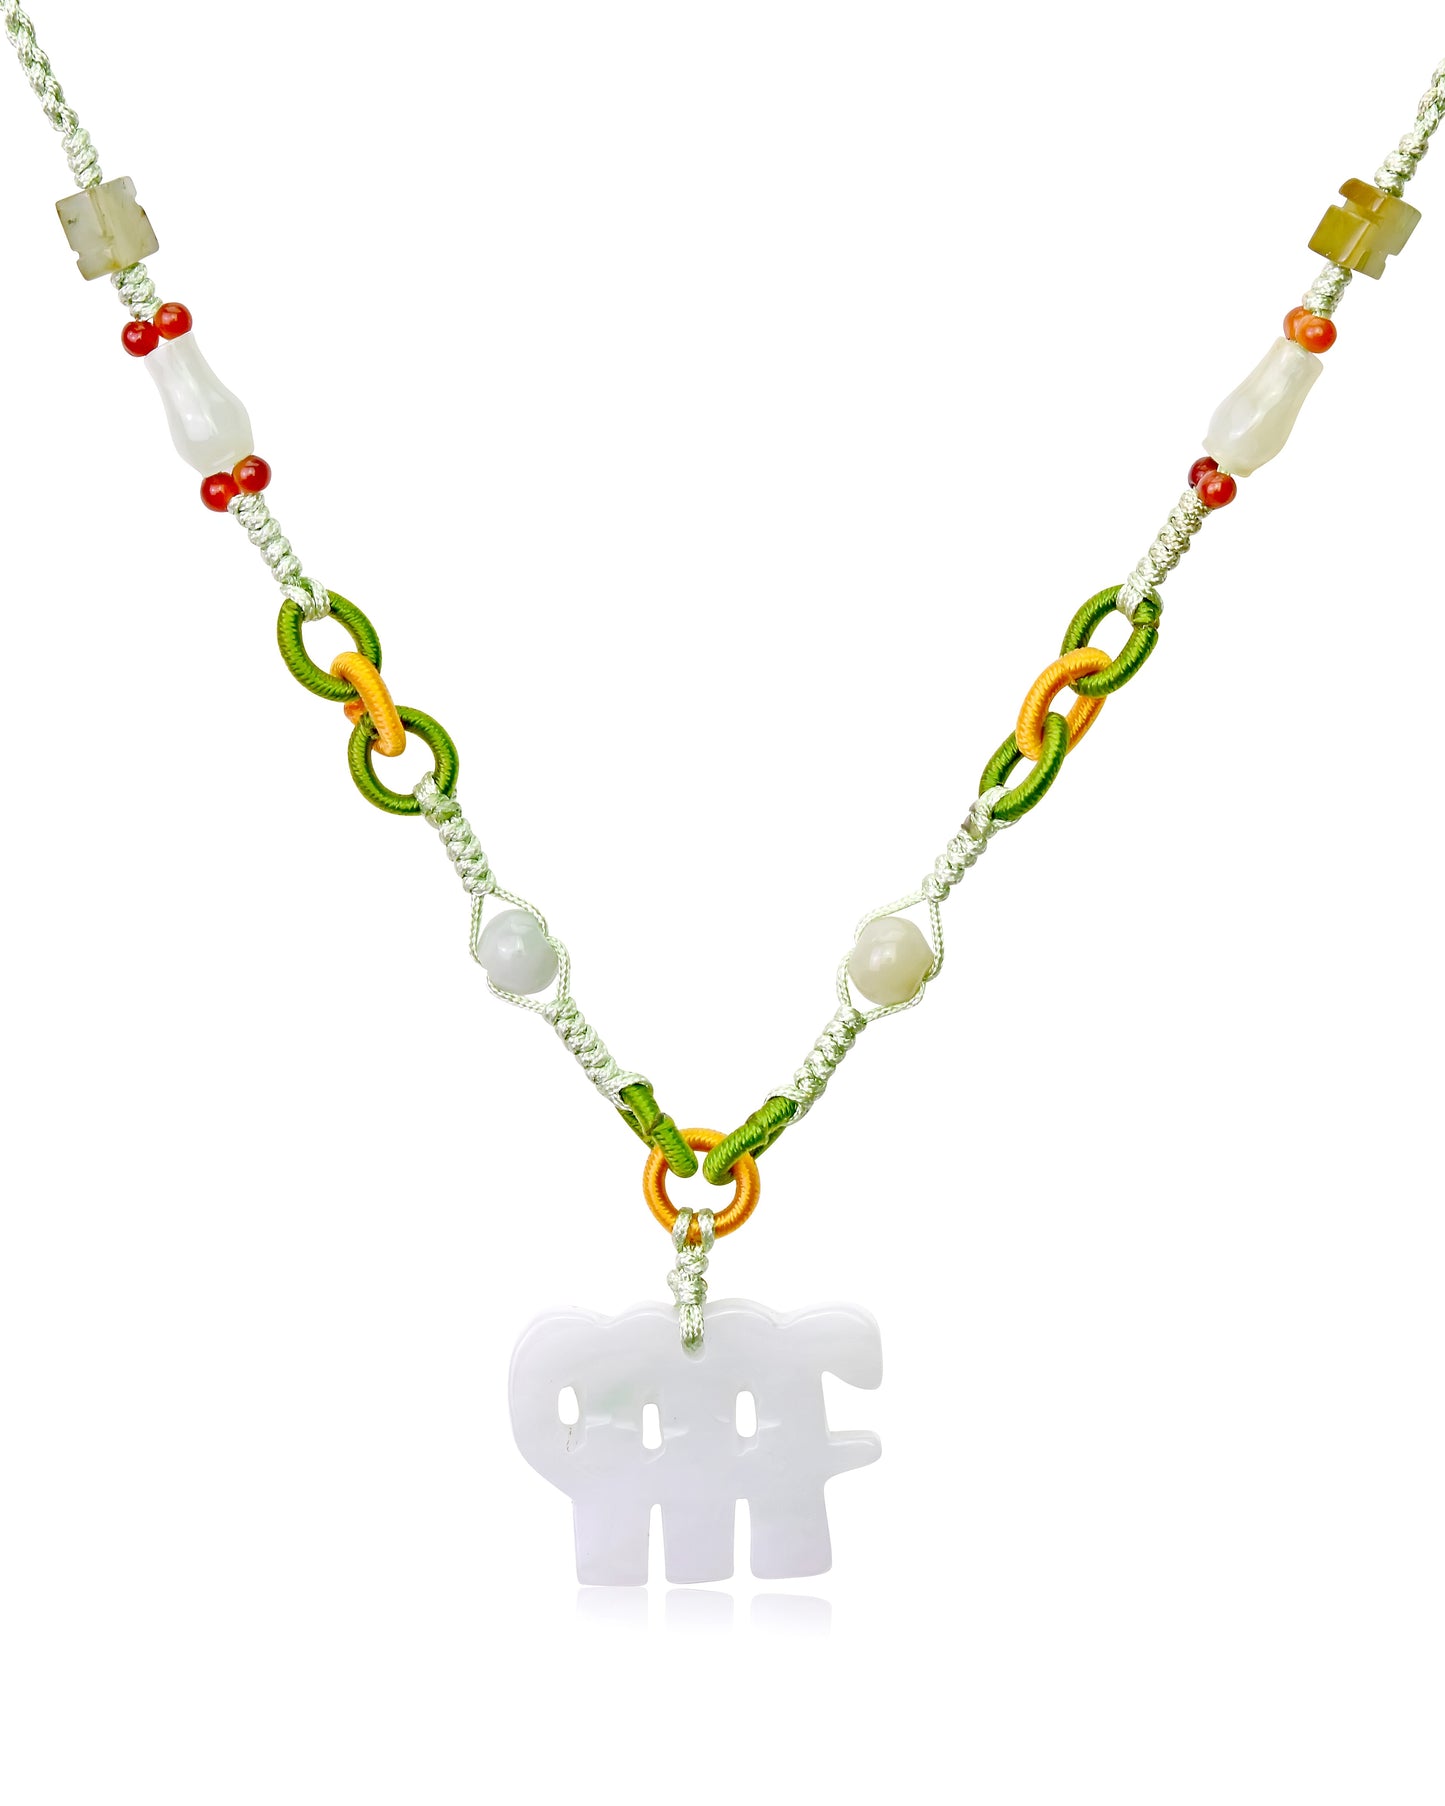 Celebrate Your Virgo Balance Nature with a Handcrafted Jade Necklace made with Sea Green Cord